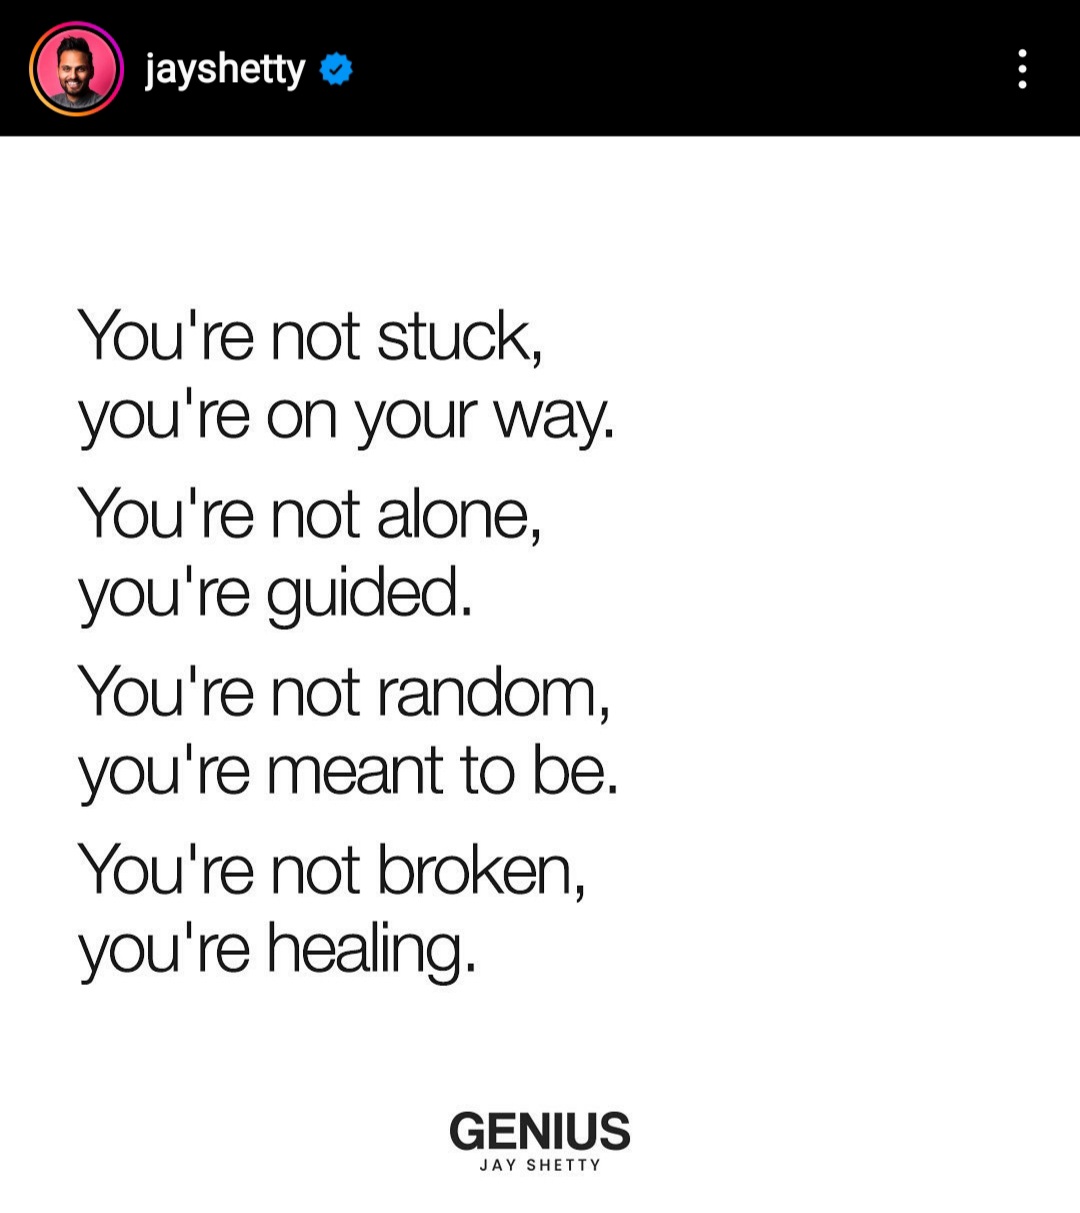 You're not stuck, you're on your way. You're not alone, you're guided. You're not random, you're meant to be. You're not broken, you're healing. Jay Shetty, coaching tip